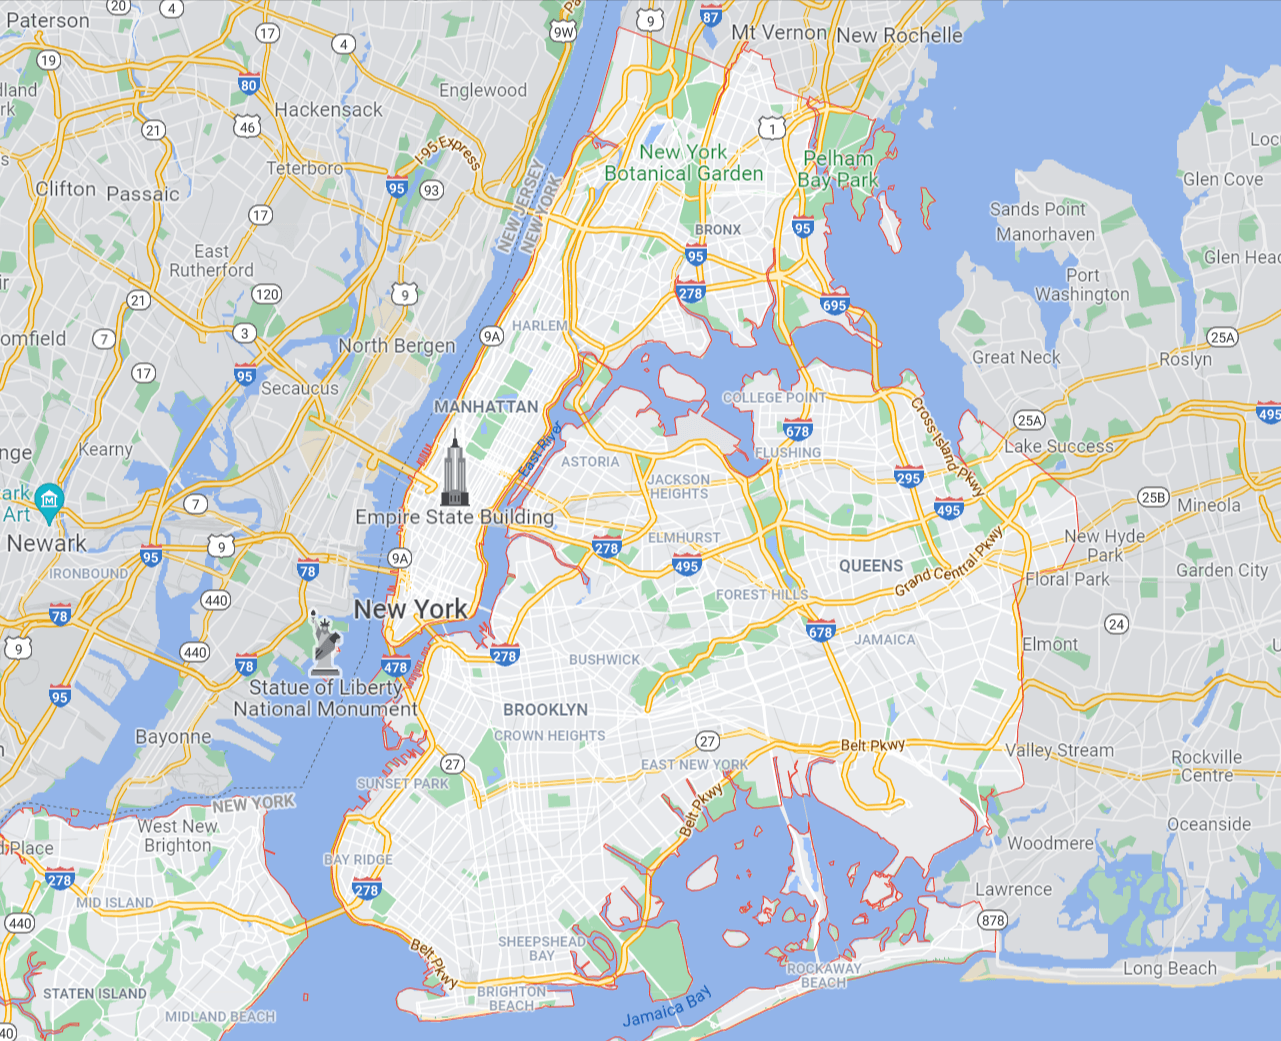 a map of new york city showing the boroughs